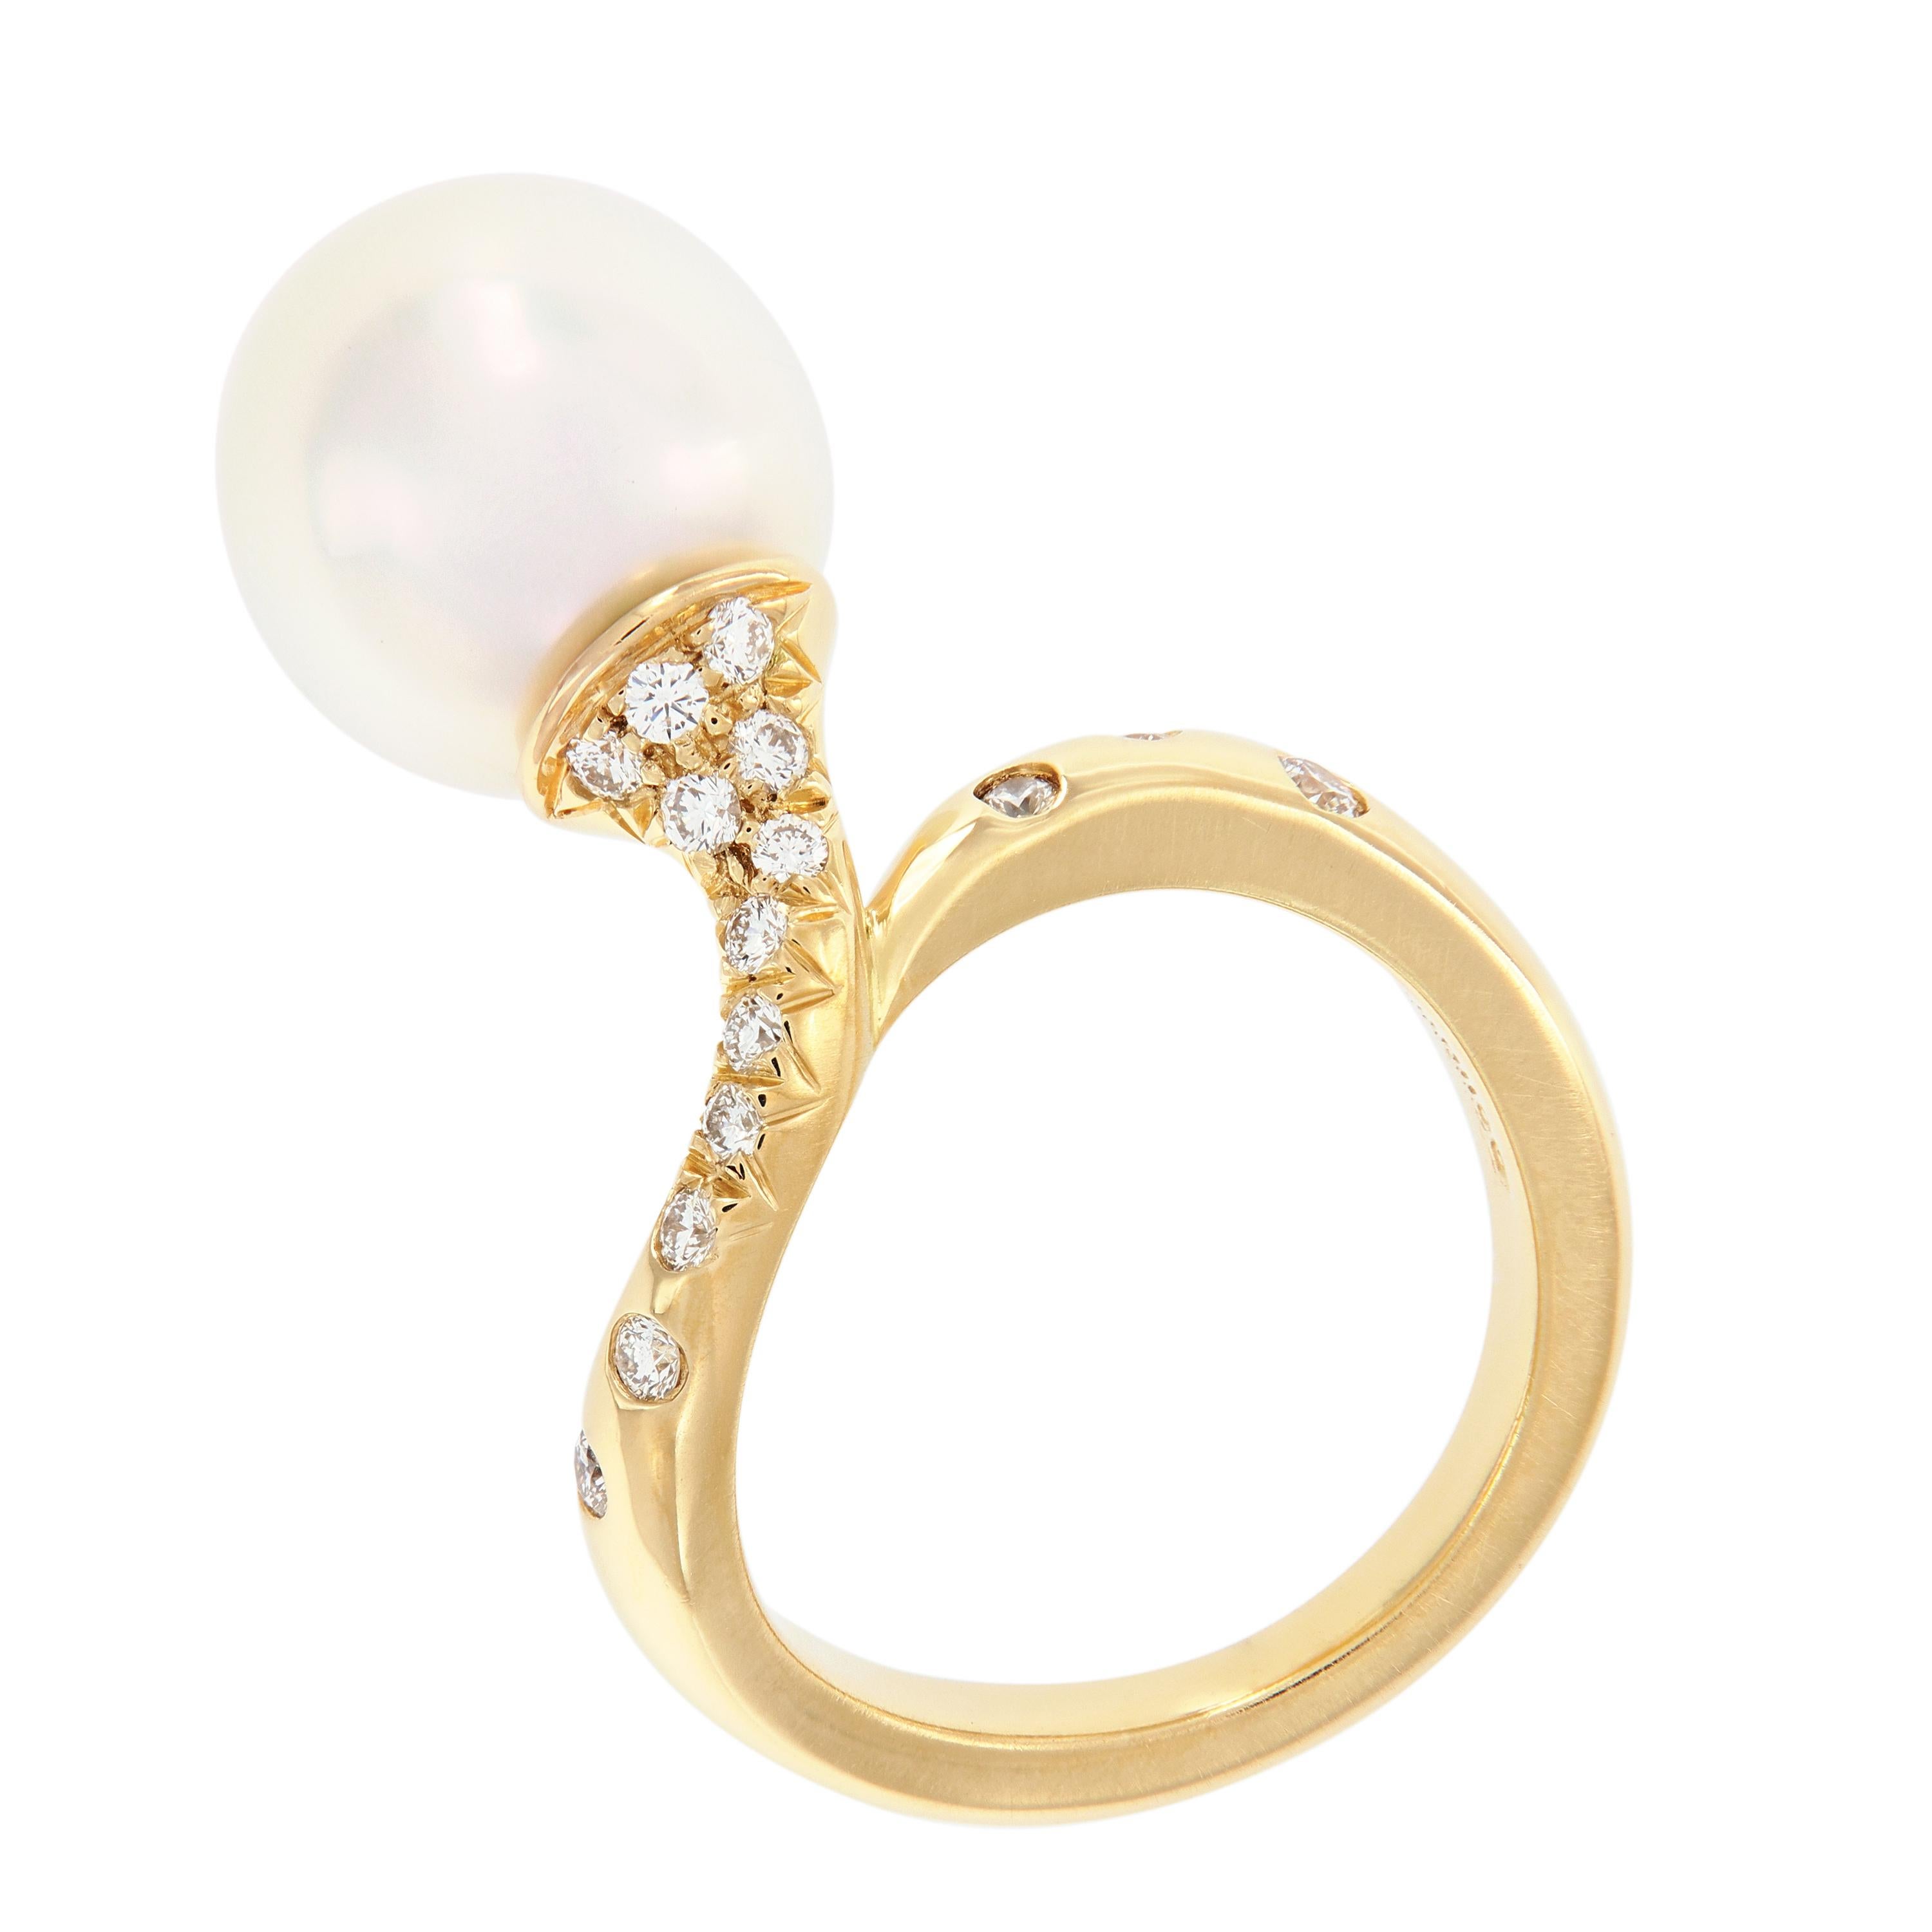 This beautiful contemporary ring is crafted in 18k yellow gold, featuring white diamonds and a lustrous 11.6mm x 11.4mm South Sea cultured pearl. Designed by Angela Cummings for Assael of New York. Weighs 8.8 grams. Ring Size 5.75.
Marked Angela